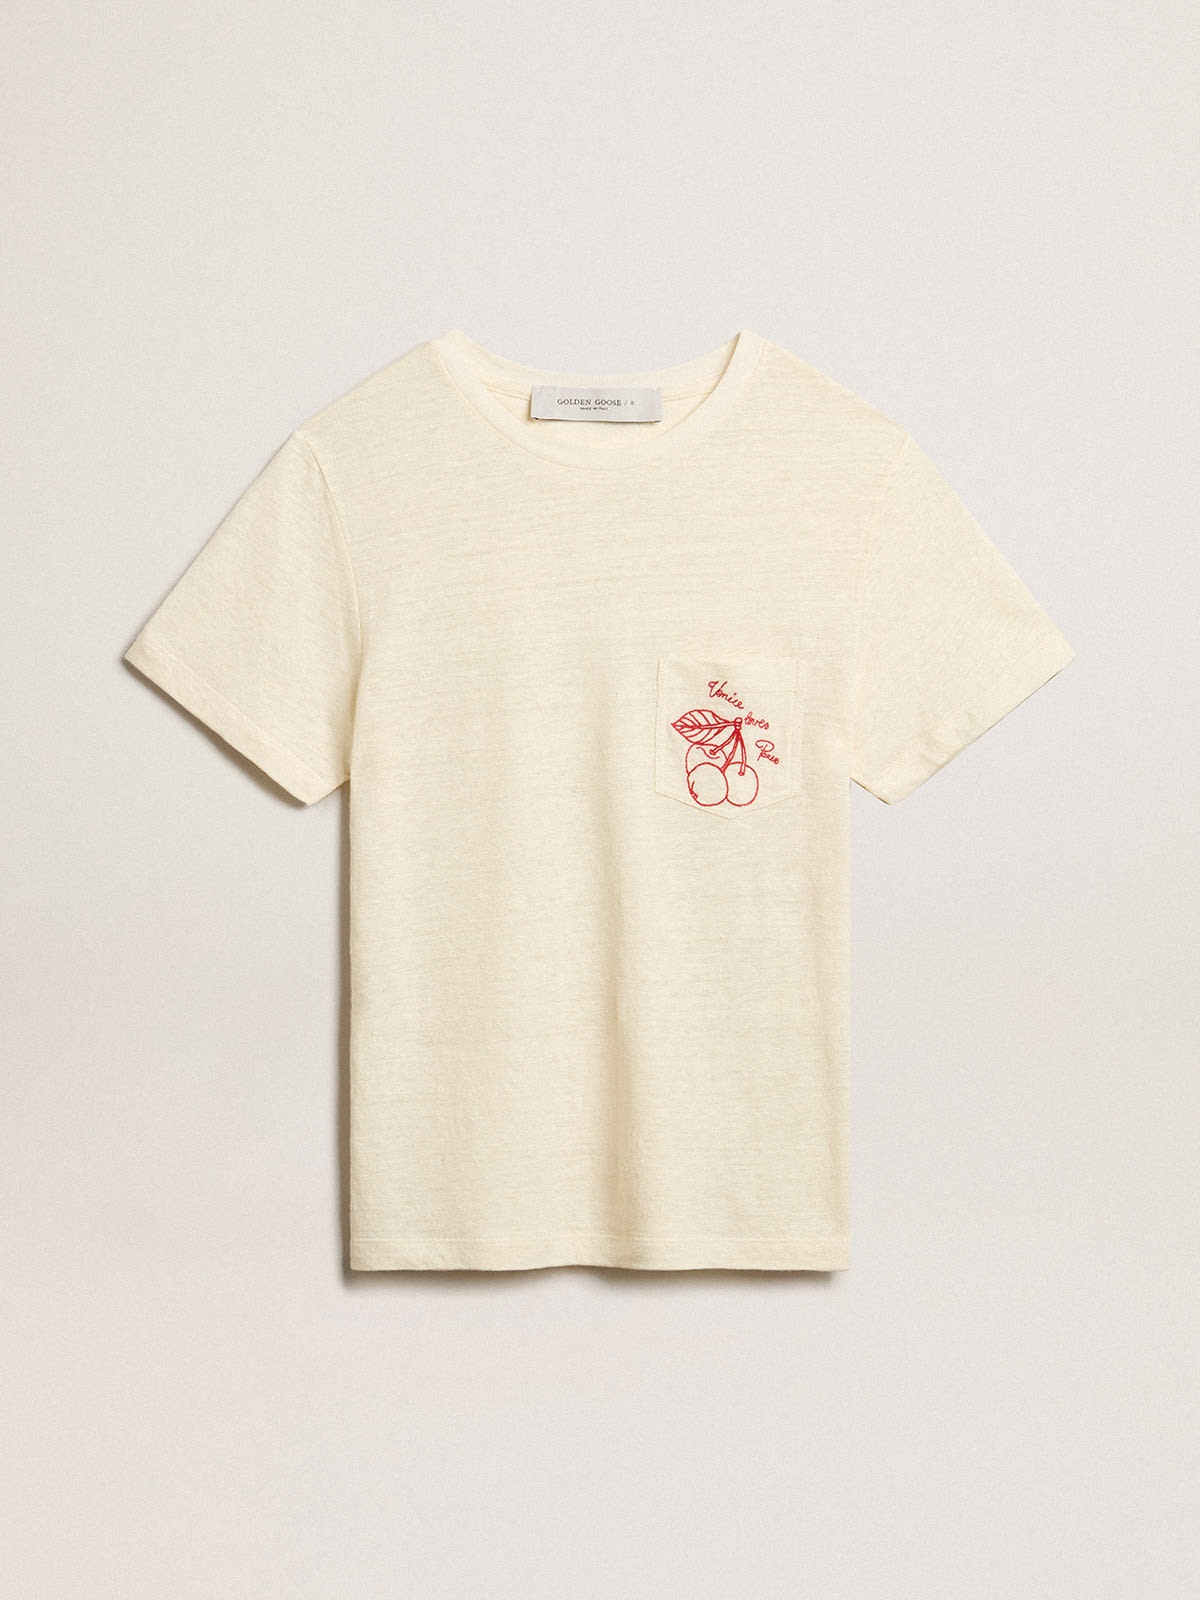 Women’s cotton T-shirt in aged white with embroidered pocket - 1